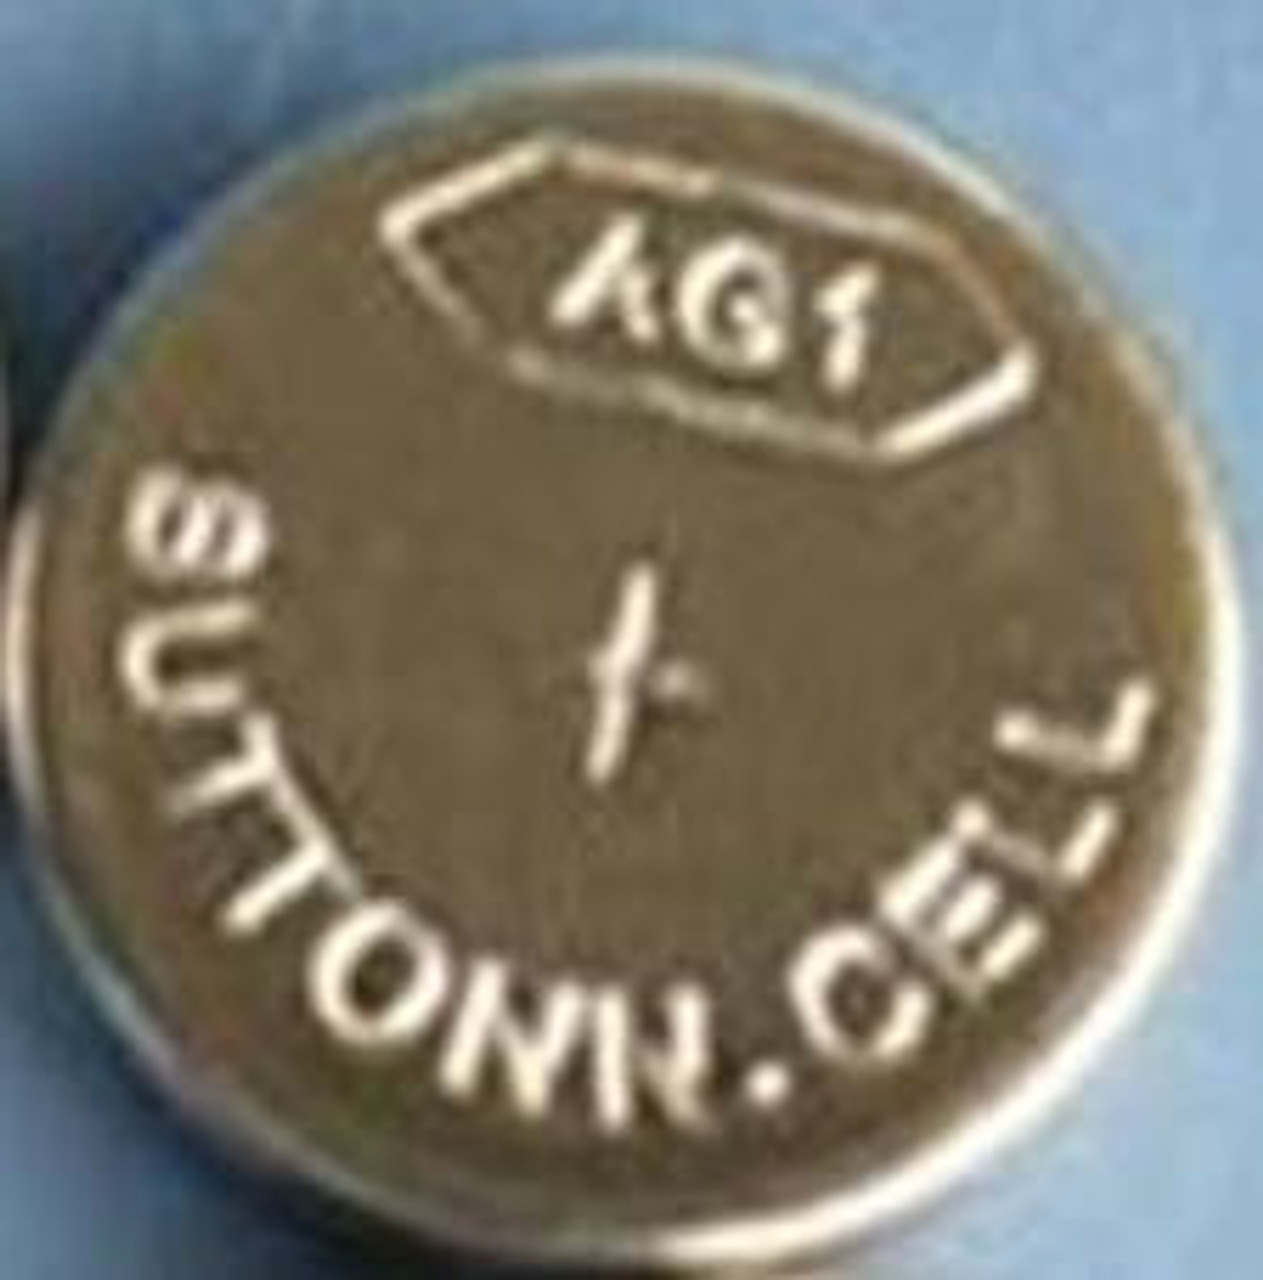 BBW AG1 / LR621 Alkaline Button Watch Battery 1.5V - 2 Pack - FREE SHIPPING